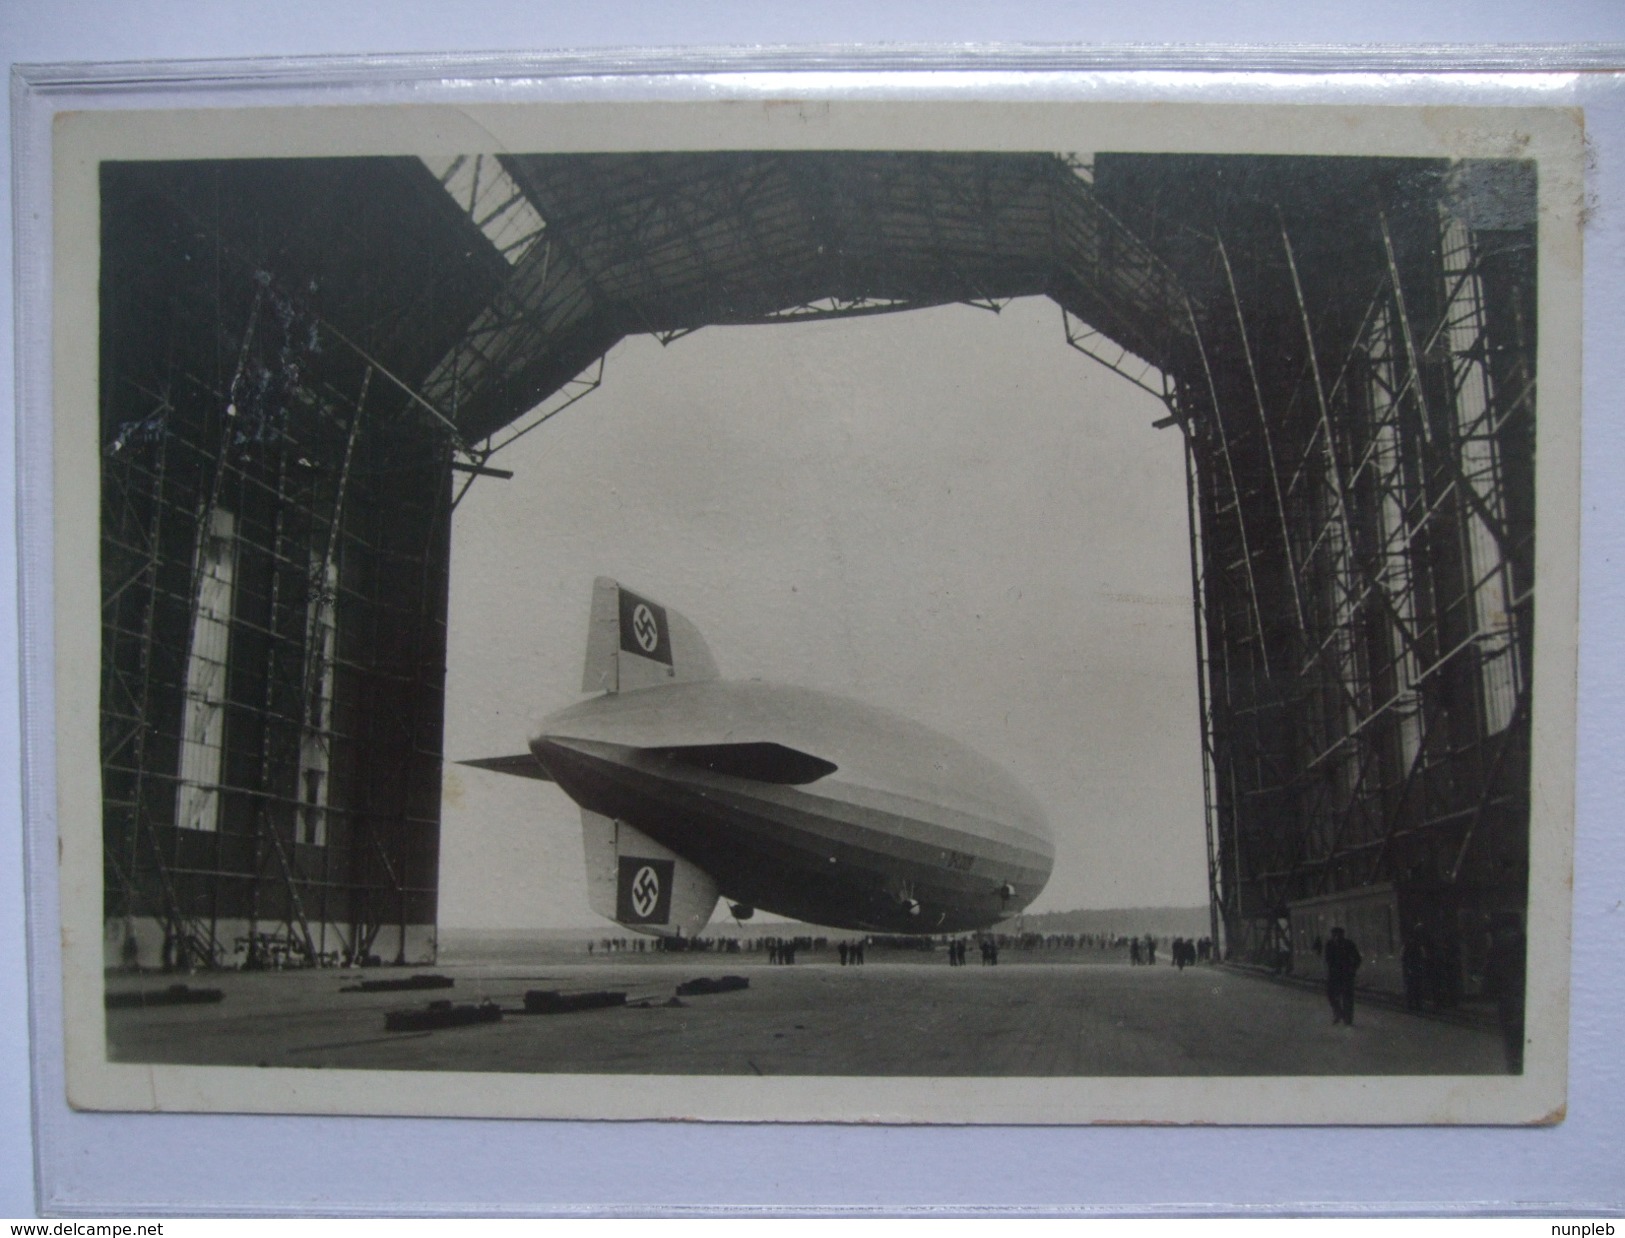 ZEPPELIN L.Z. 129 Hindenburg In Shed - Zeppelinhalle Cachet To Rear - Air Mail Sent To England - Dirigeables